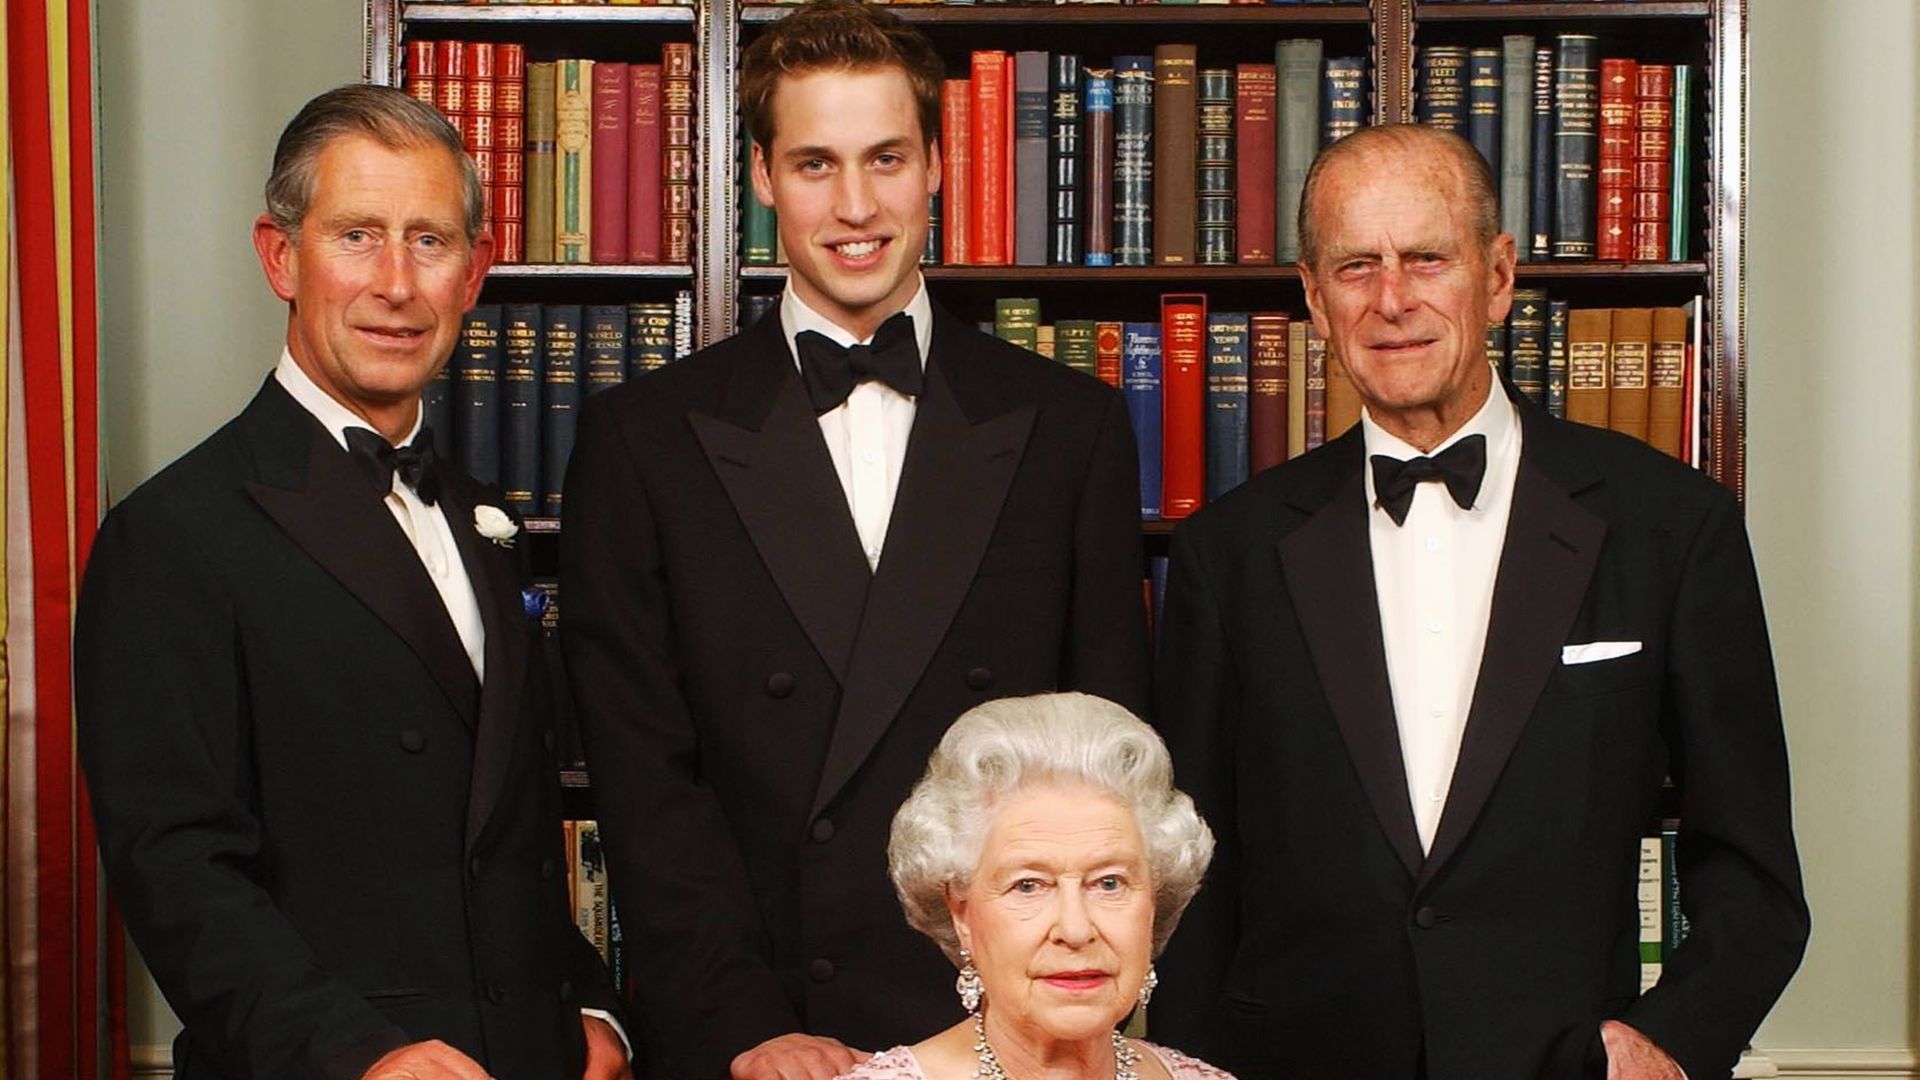 King Charles, Prince William and Prince Philip standing behind the Queen